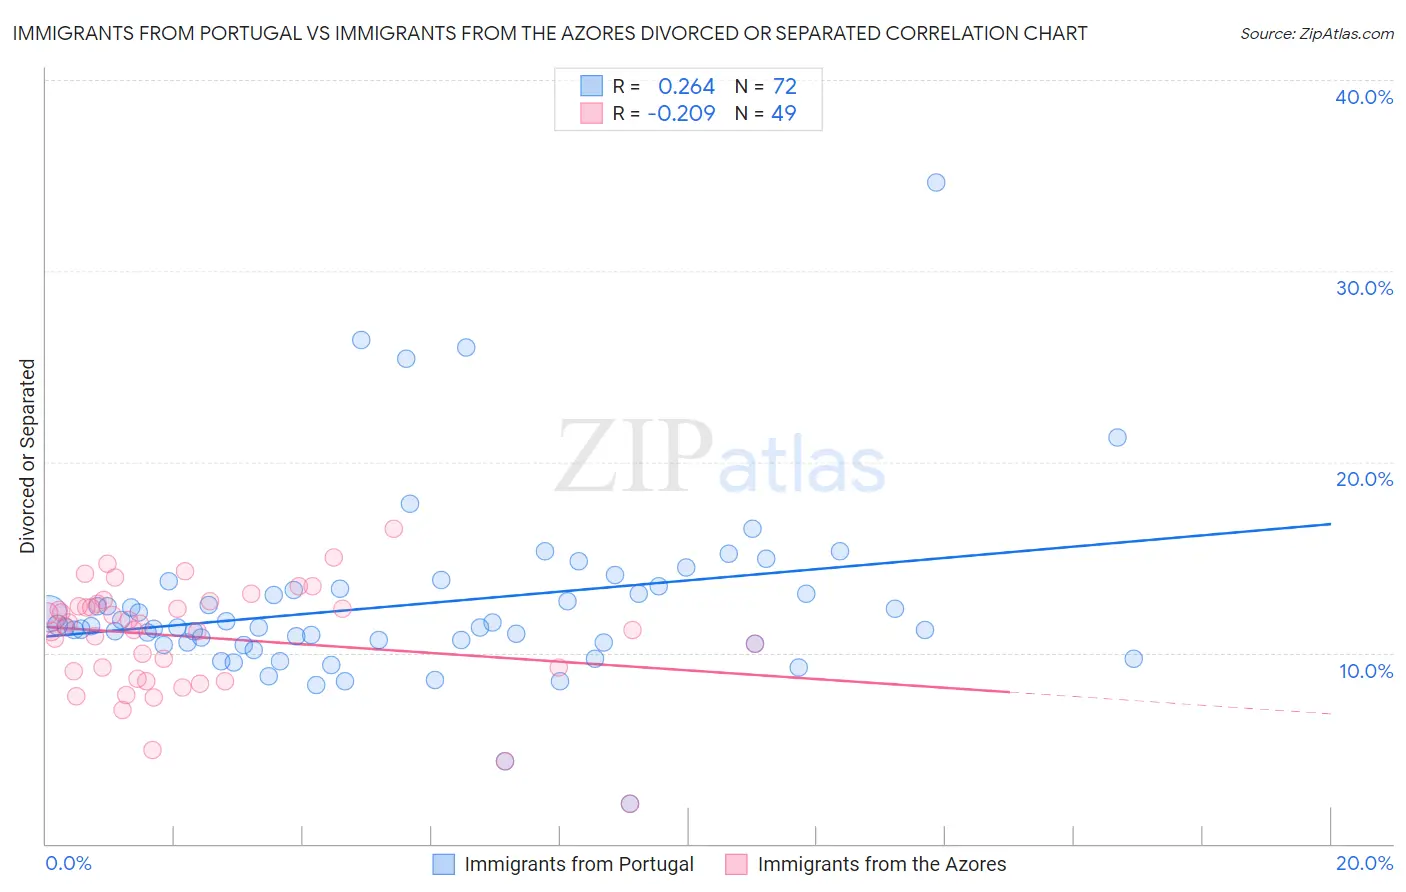 Immigrants from Portugal vs Immigrants from the Azores Divorced or Separated